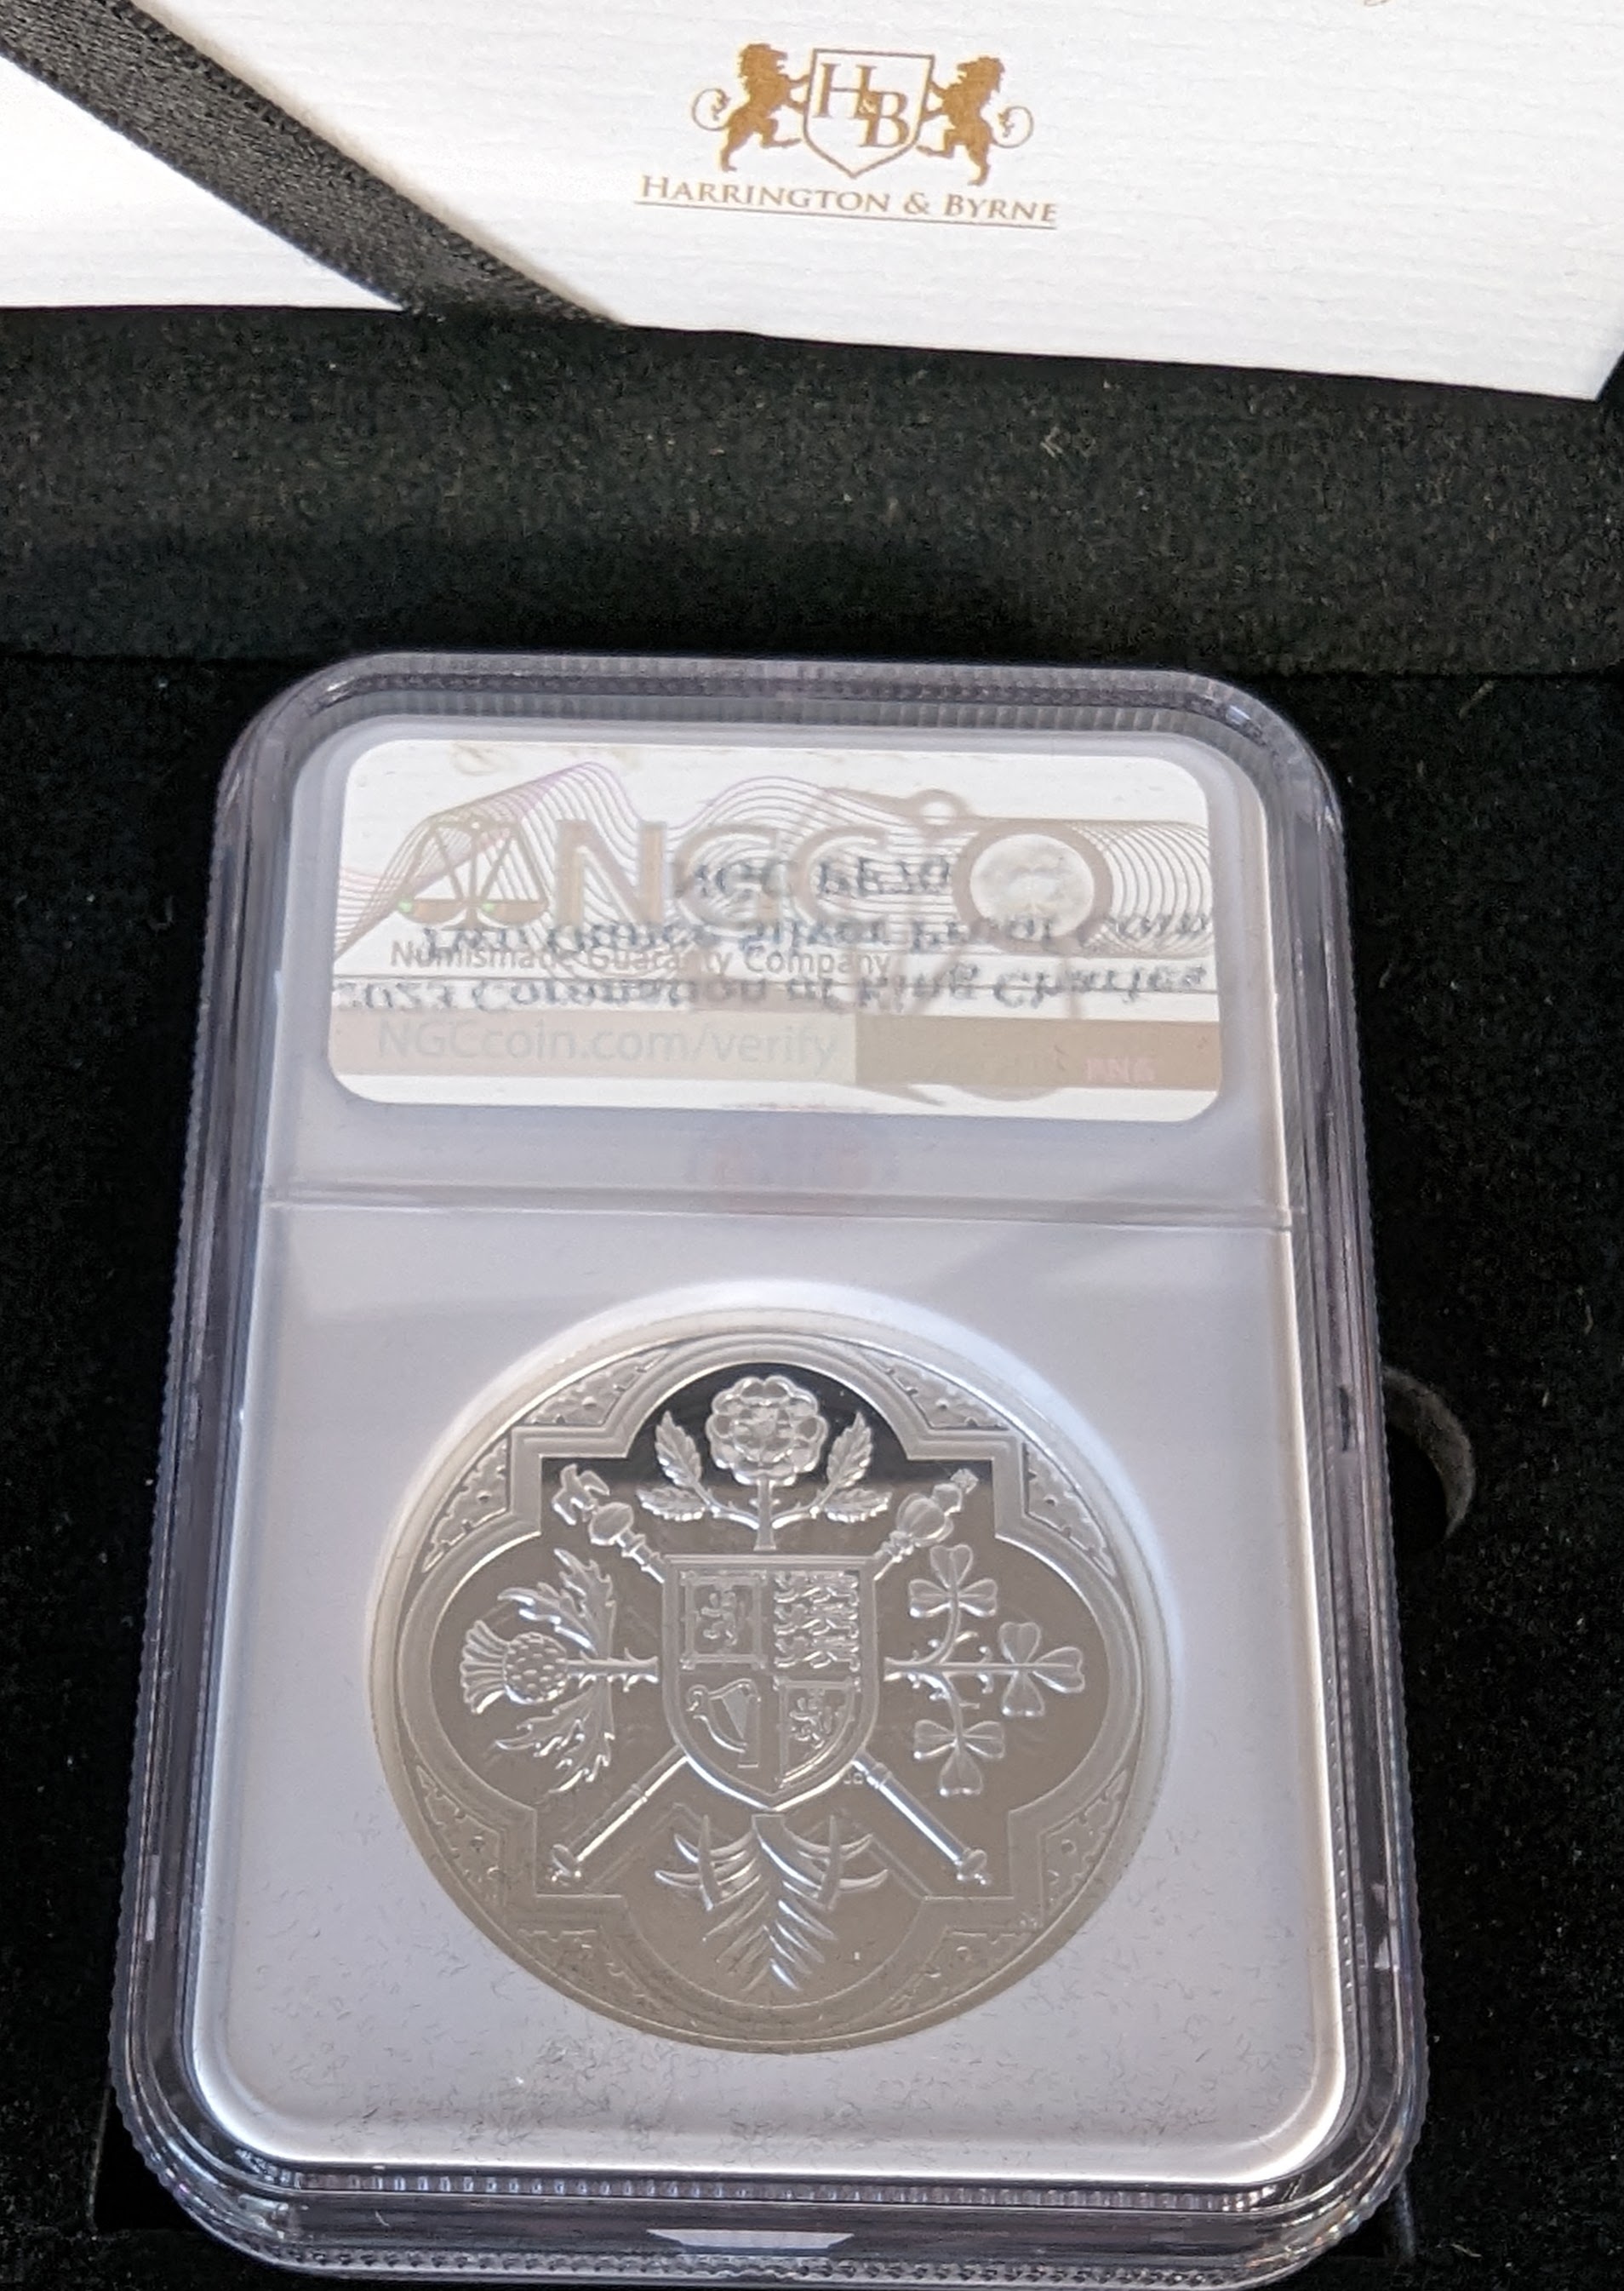 A 2023 Tristan Da Cunha Silver Proof 5oz £25 AND 2oz £5 coin "Charles III Coronation" NGC Graded - Image 4 of 5